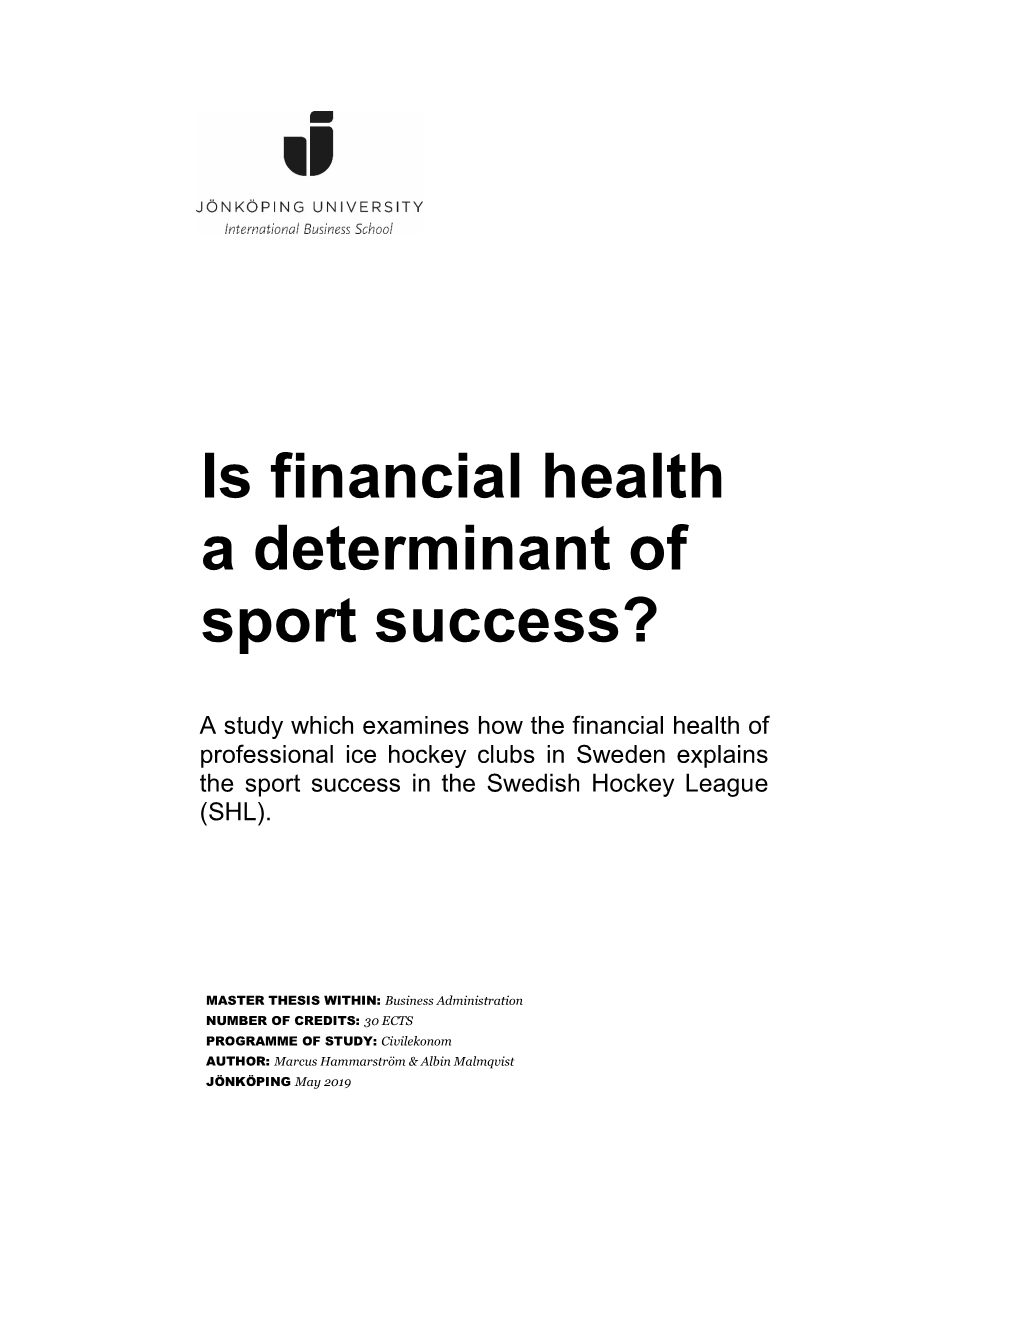 Is Financial Health a Determinant of Sport Success?